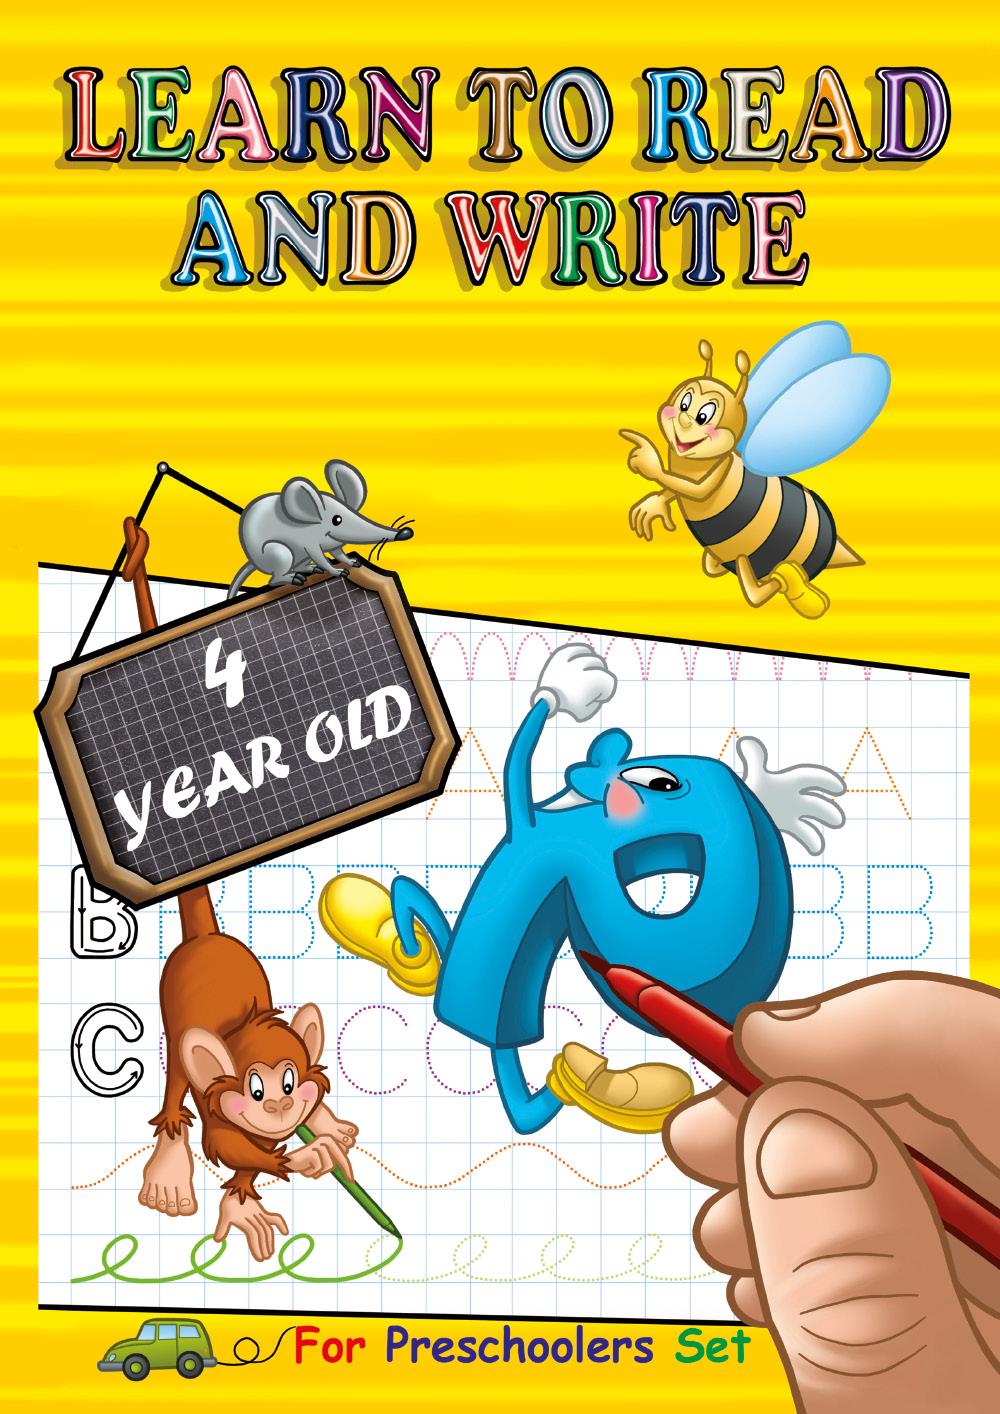 Learn to read and write 4 year old